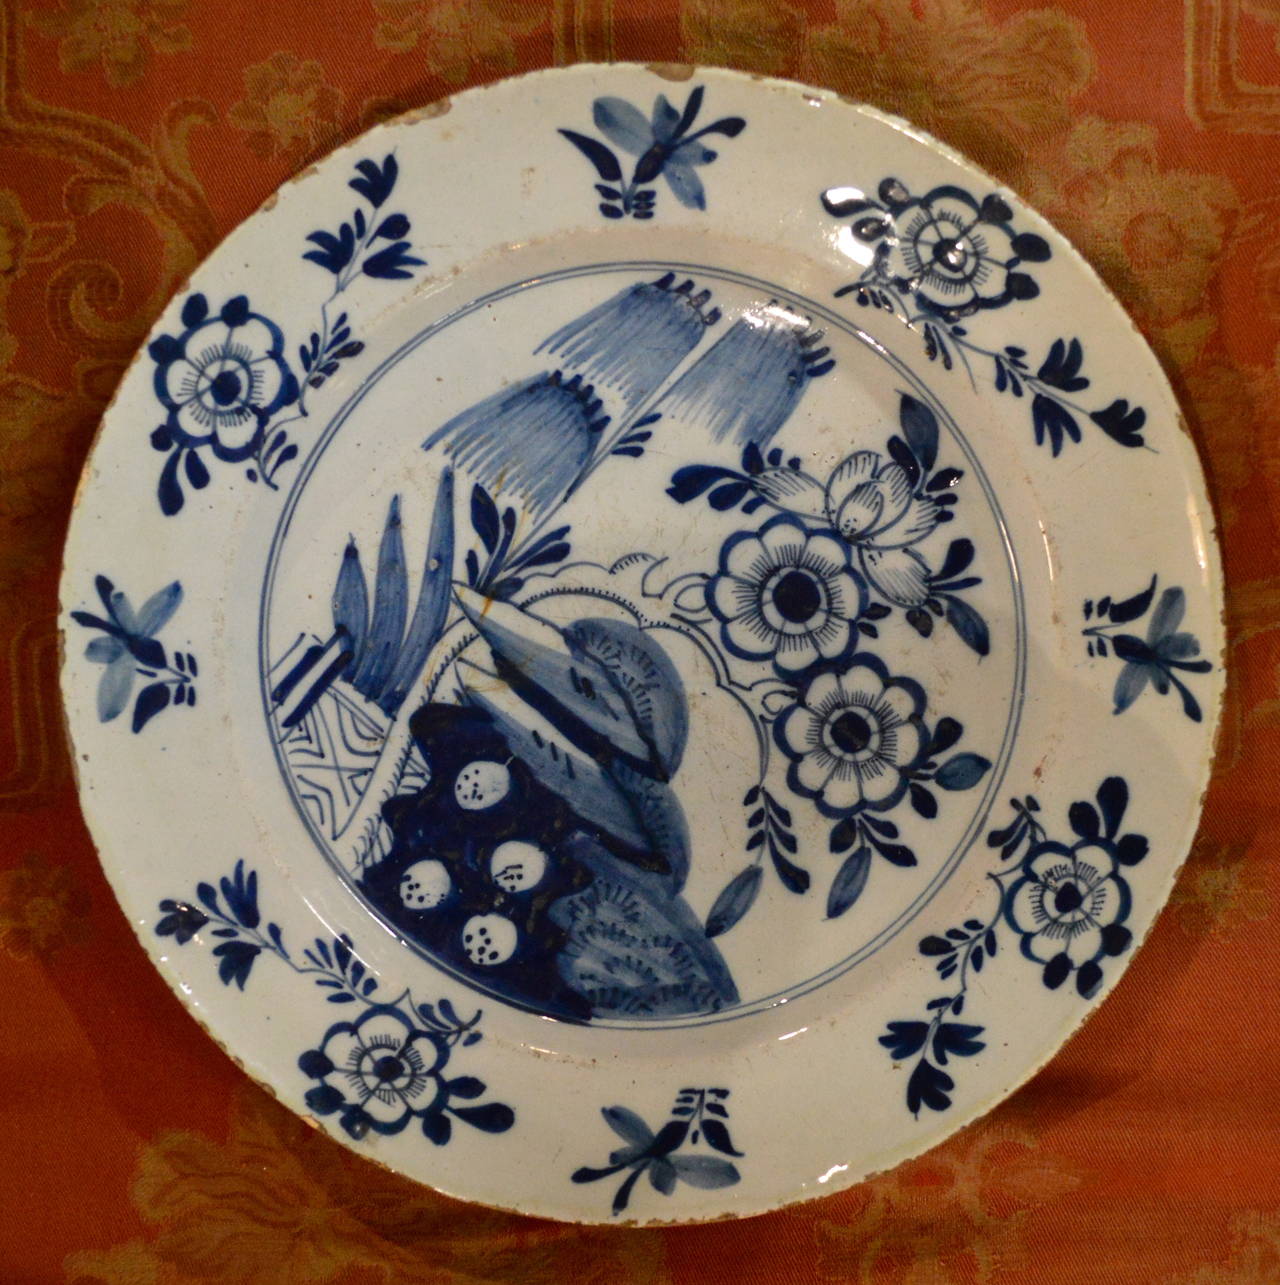 Pair of 18th century porcelain delft platters, blue and white.